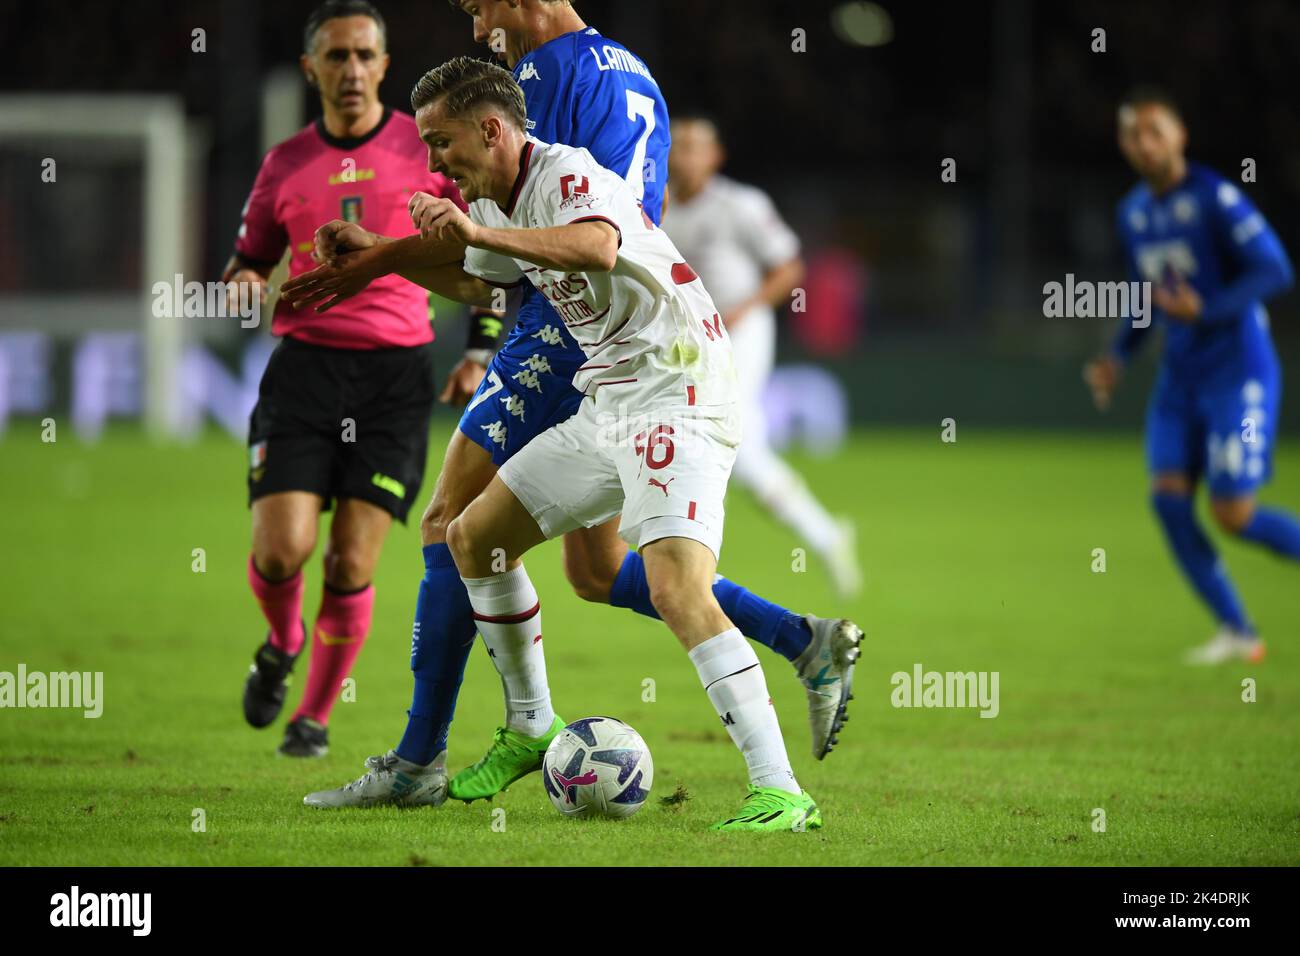 Alexis Saelemaekers (Milan)Sam Lammers (Empoli) during the 'Serie A' match between match between Empoli 1-3 Milan at Carlo Castellani Stadium on October 1, 2022 in Empoli, Italy. Credit: Maurizio Borsari/AFLO/Alamy Live News Stock Photo